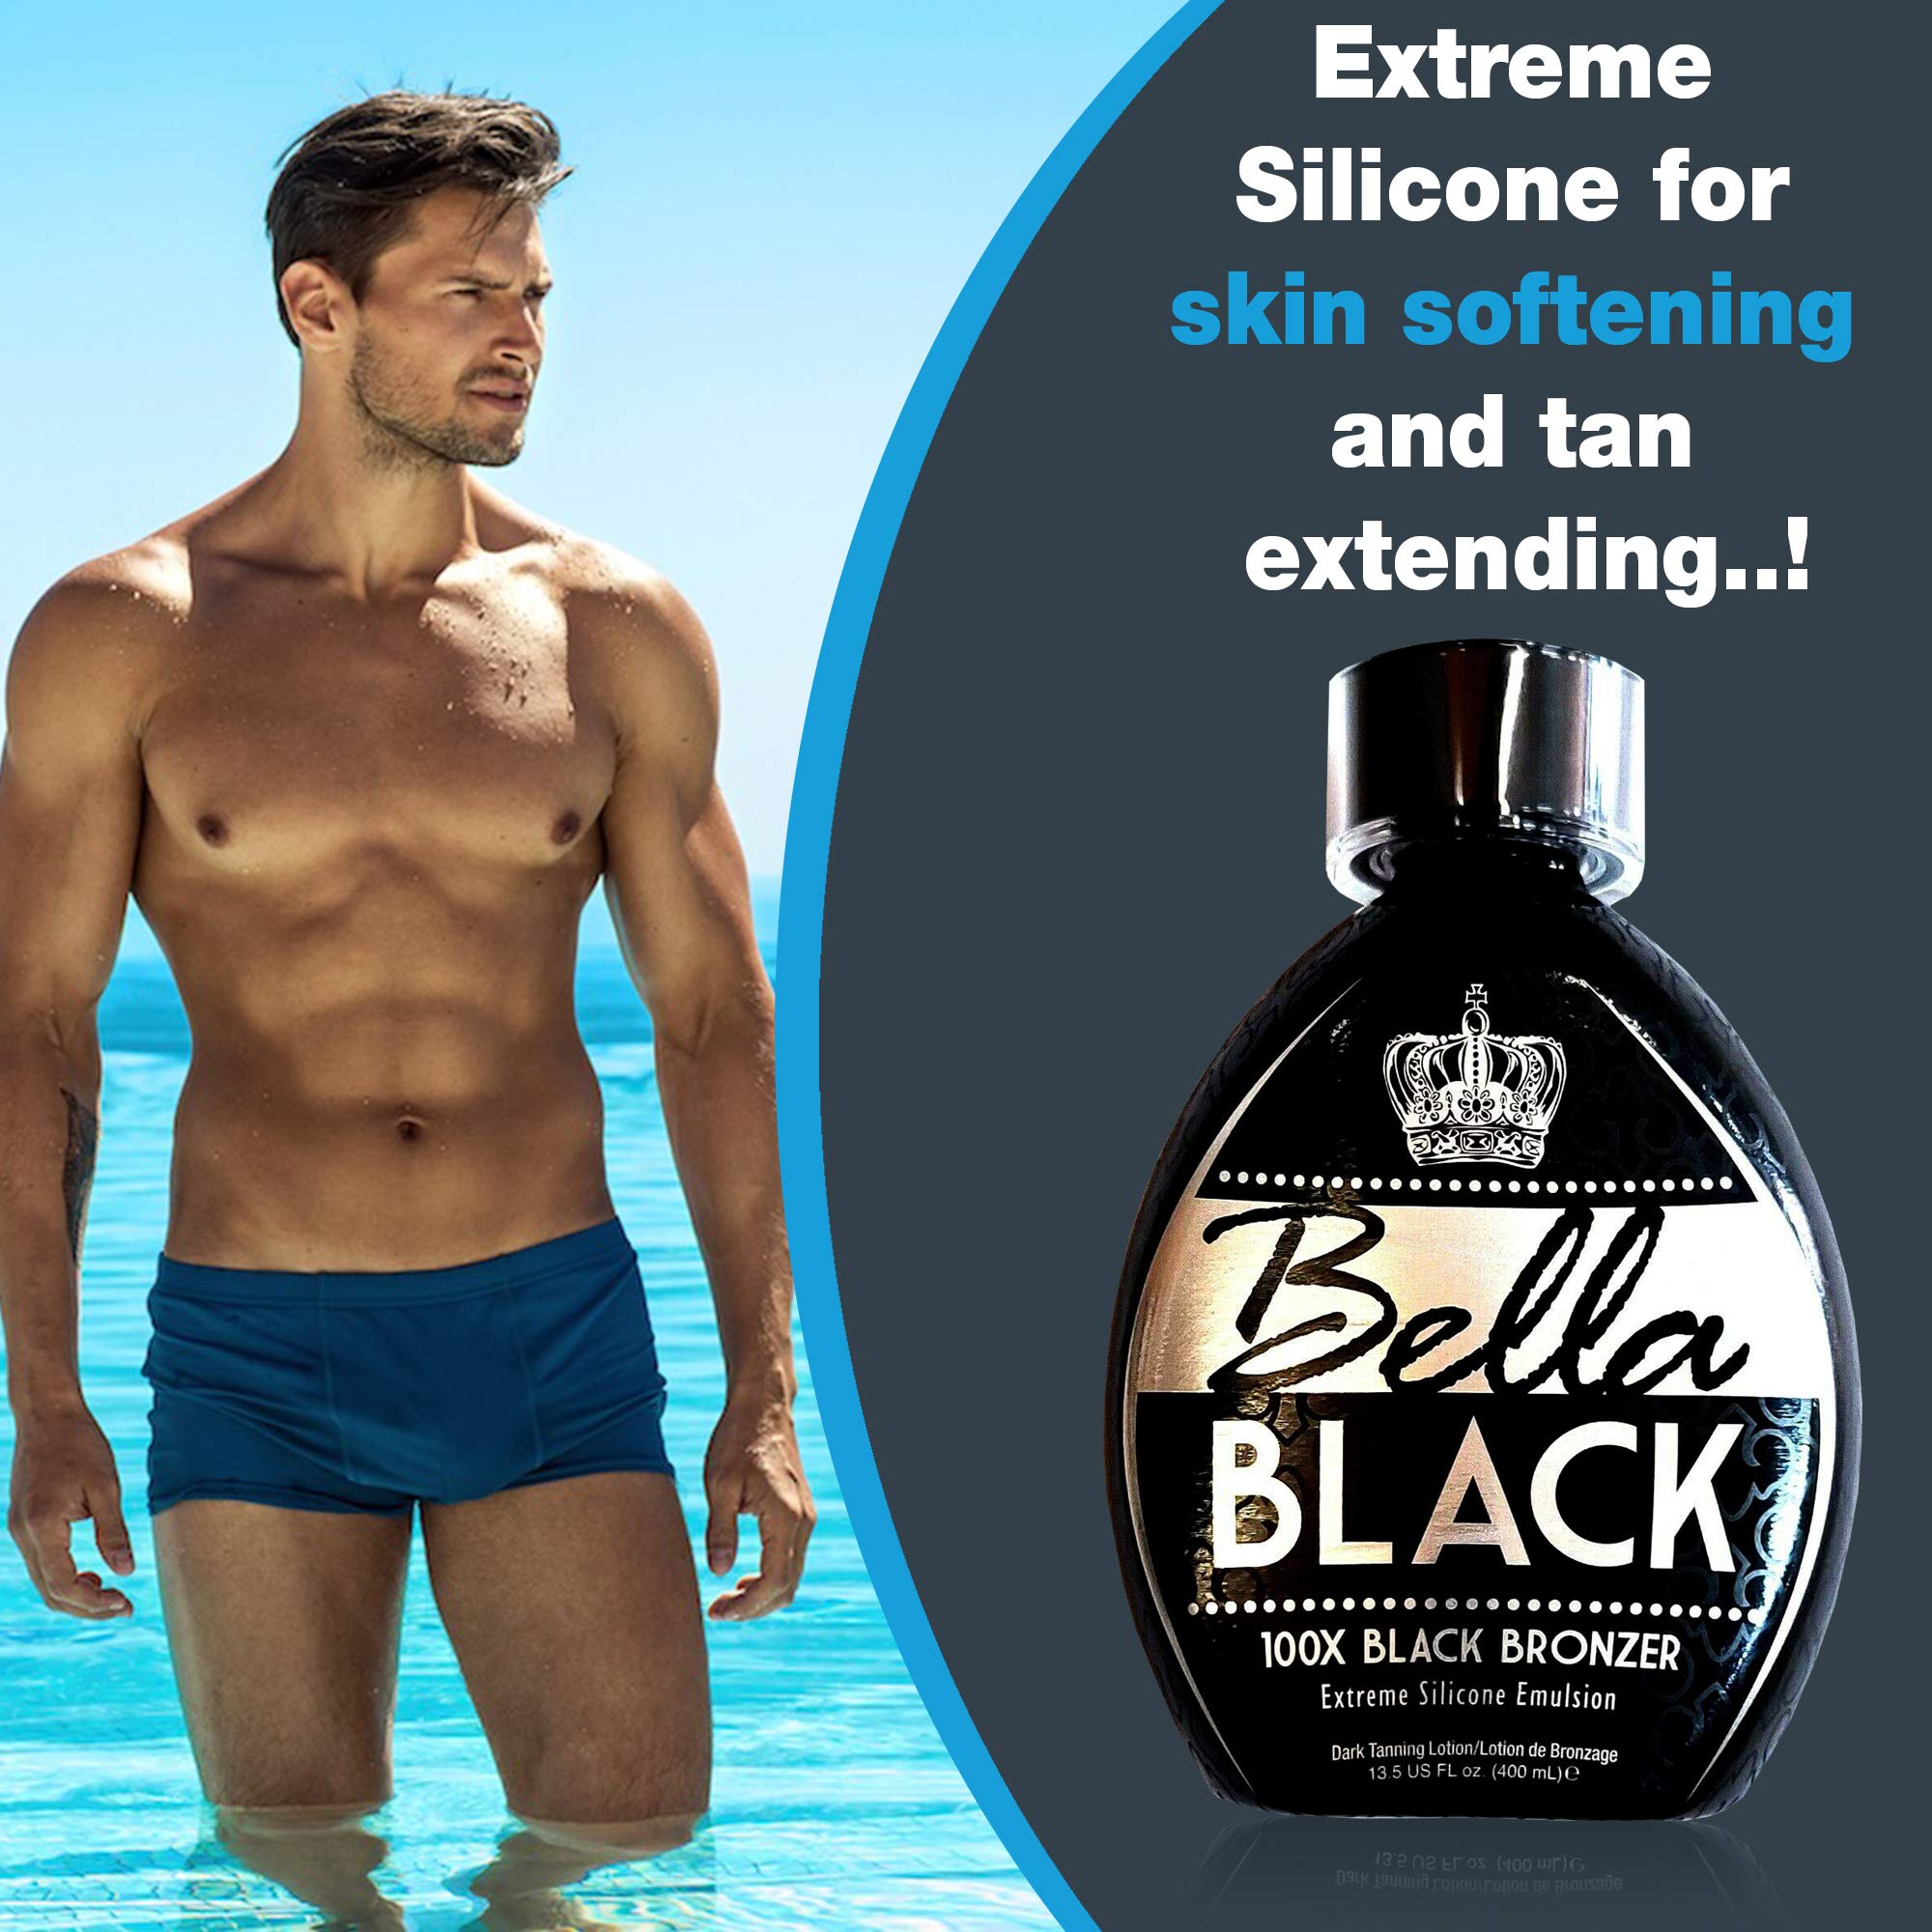 Bella Black 100X Bronzer Tanning Lotion – Premium Tanning Bed Lotion with Extreme Silicone Emulsion and Banana Fruit Extract – Instant Results – Dark Tanning Lotion for Indoor Tanning Beds - 13.5oz